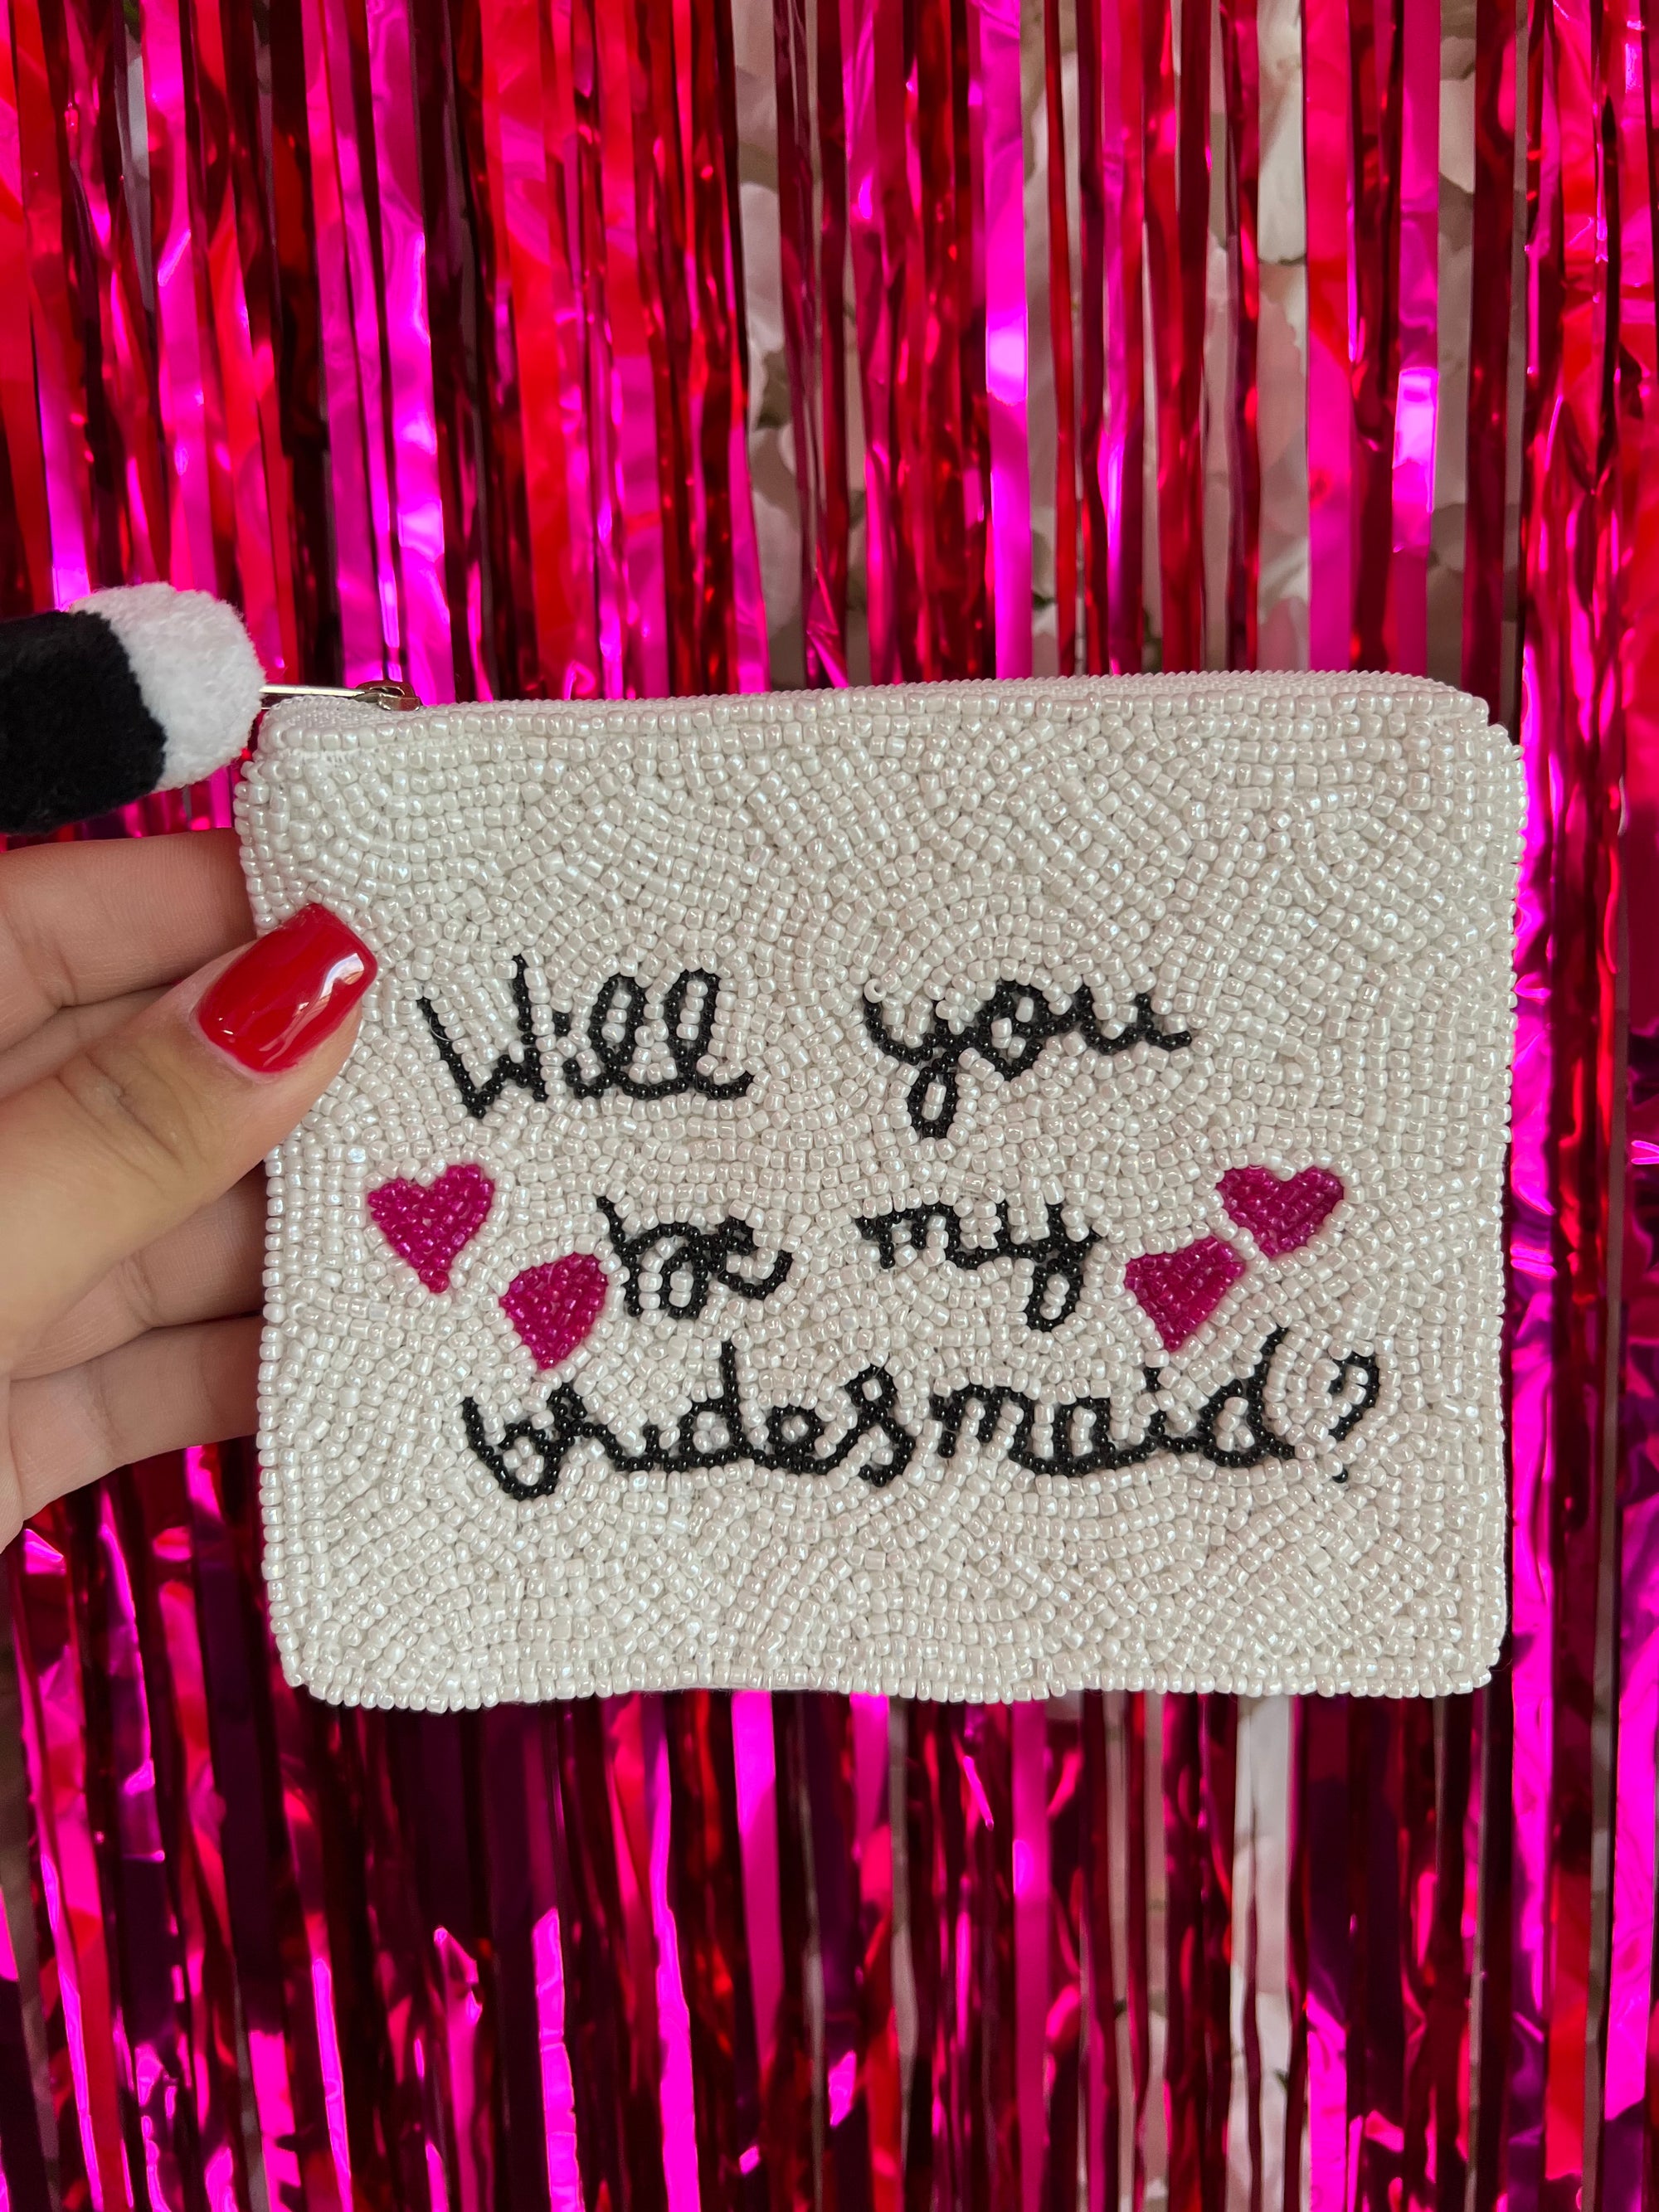 WILL YOU BE MY BRIDESMAID COIN BAG